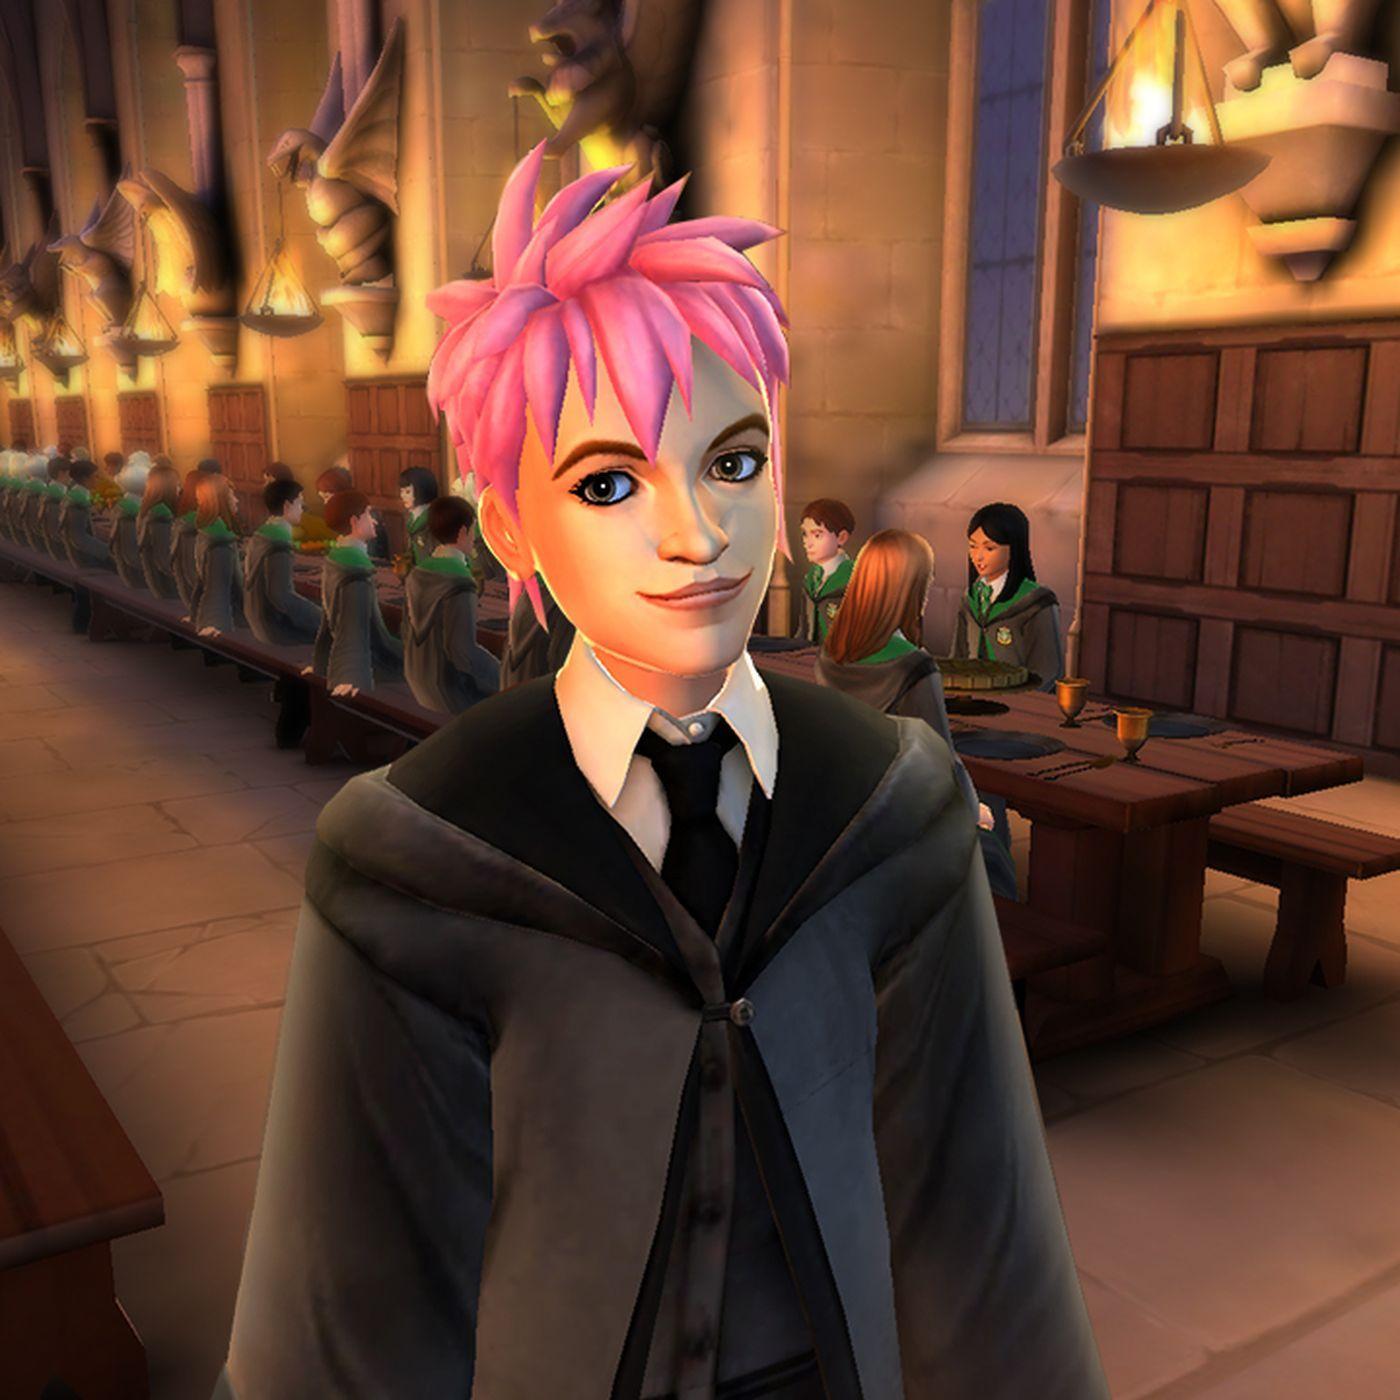 Harry Potter: Hogwarts Mystery RPG is a dream for the HP obsessed